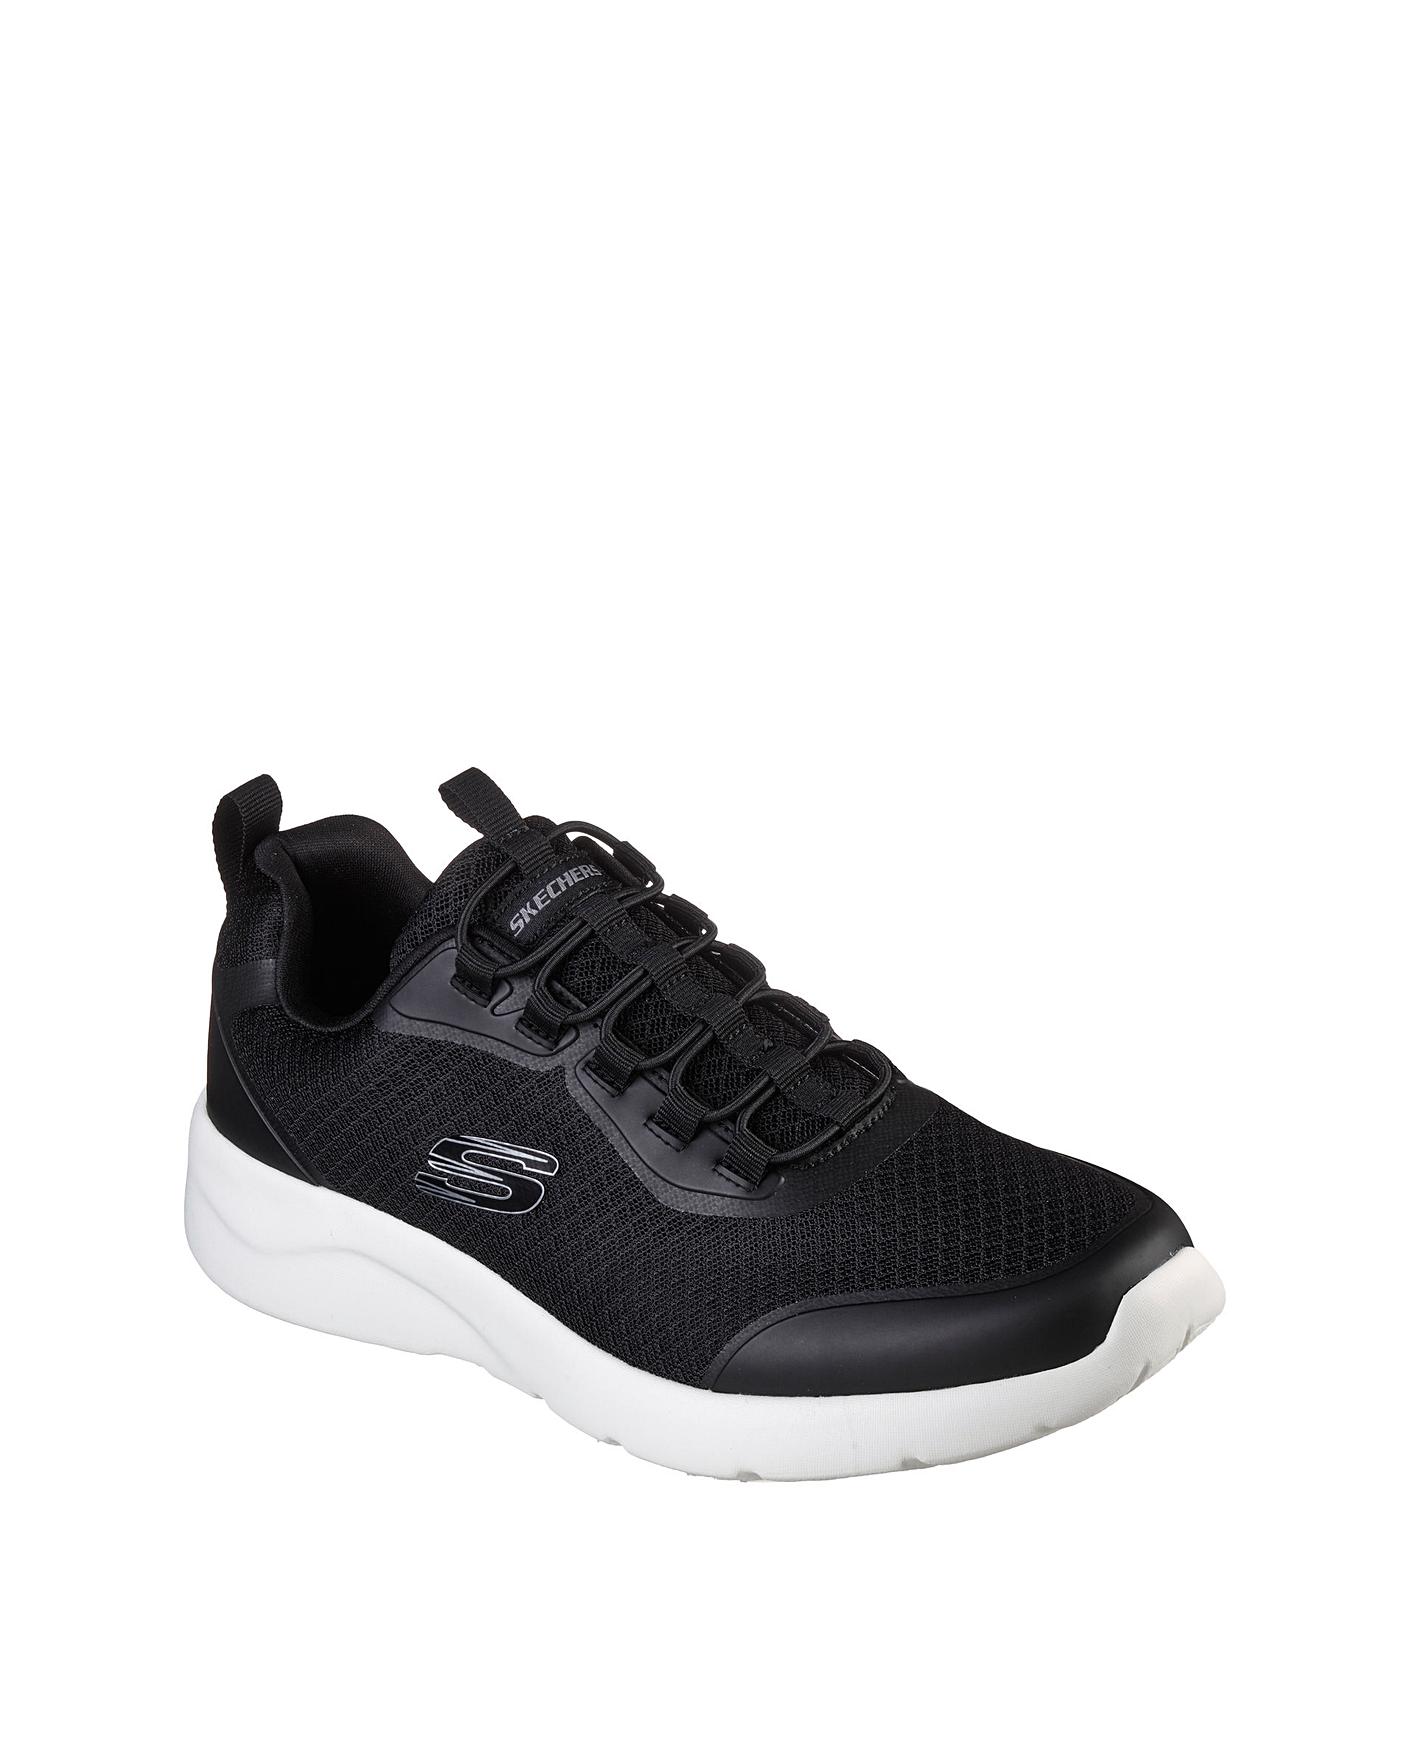 Skechers Dynamight 2.0 Trainers | J D Williams